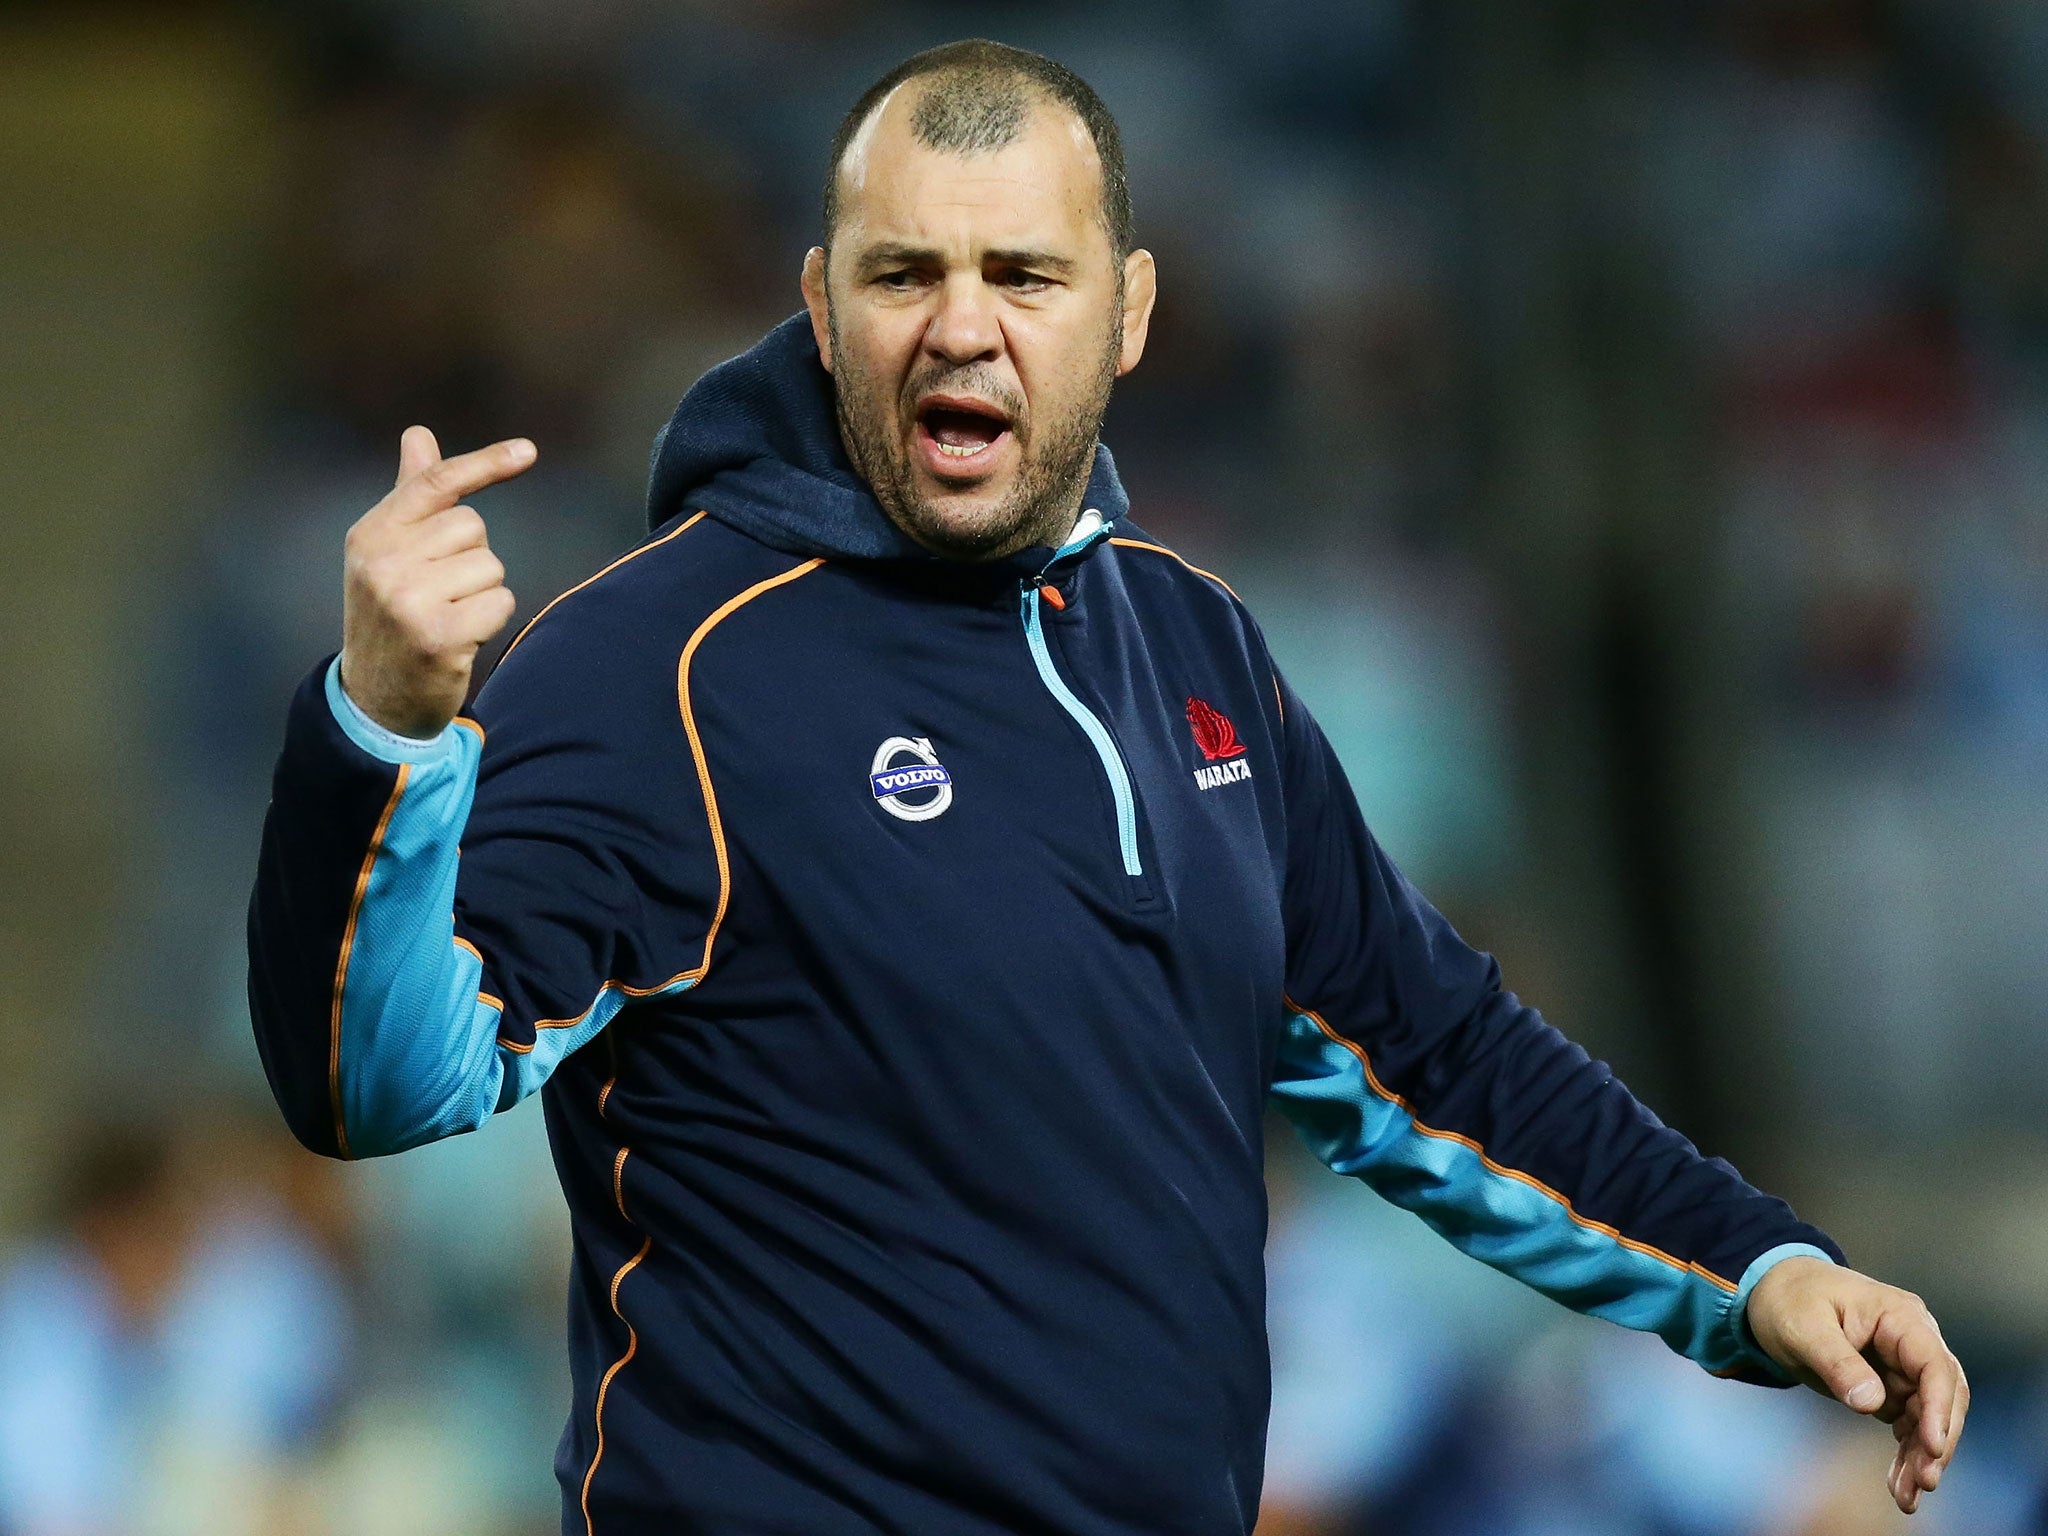 Michael Cheika is tipped to become the new Australia coach